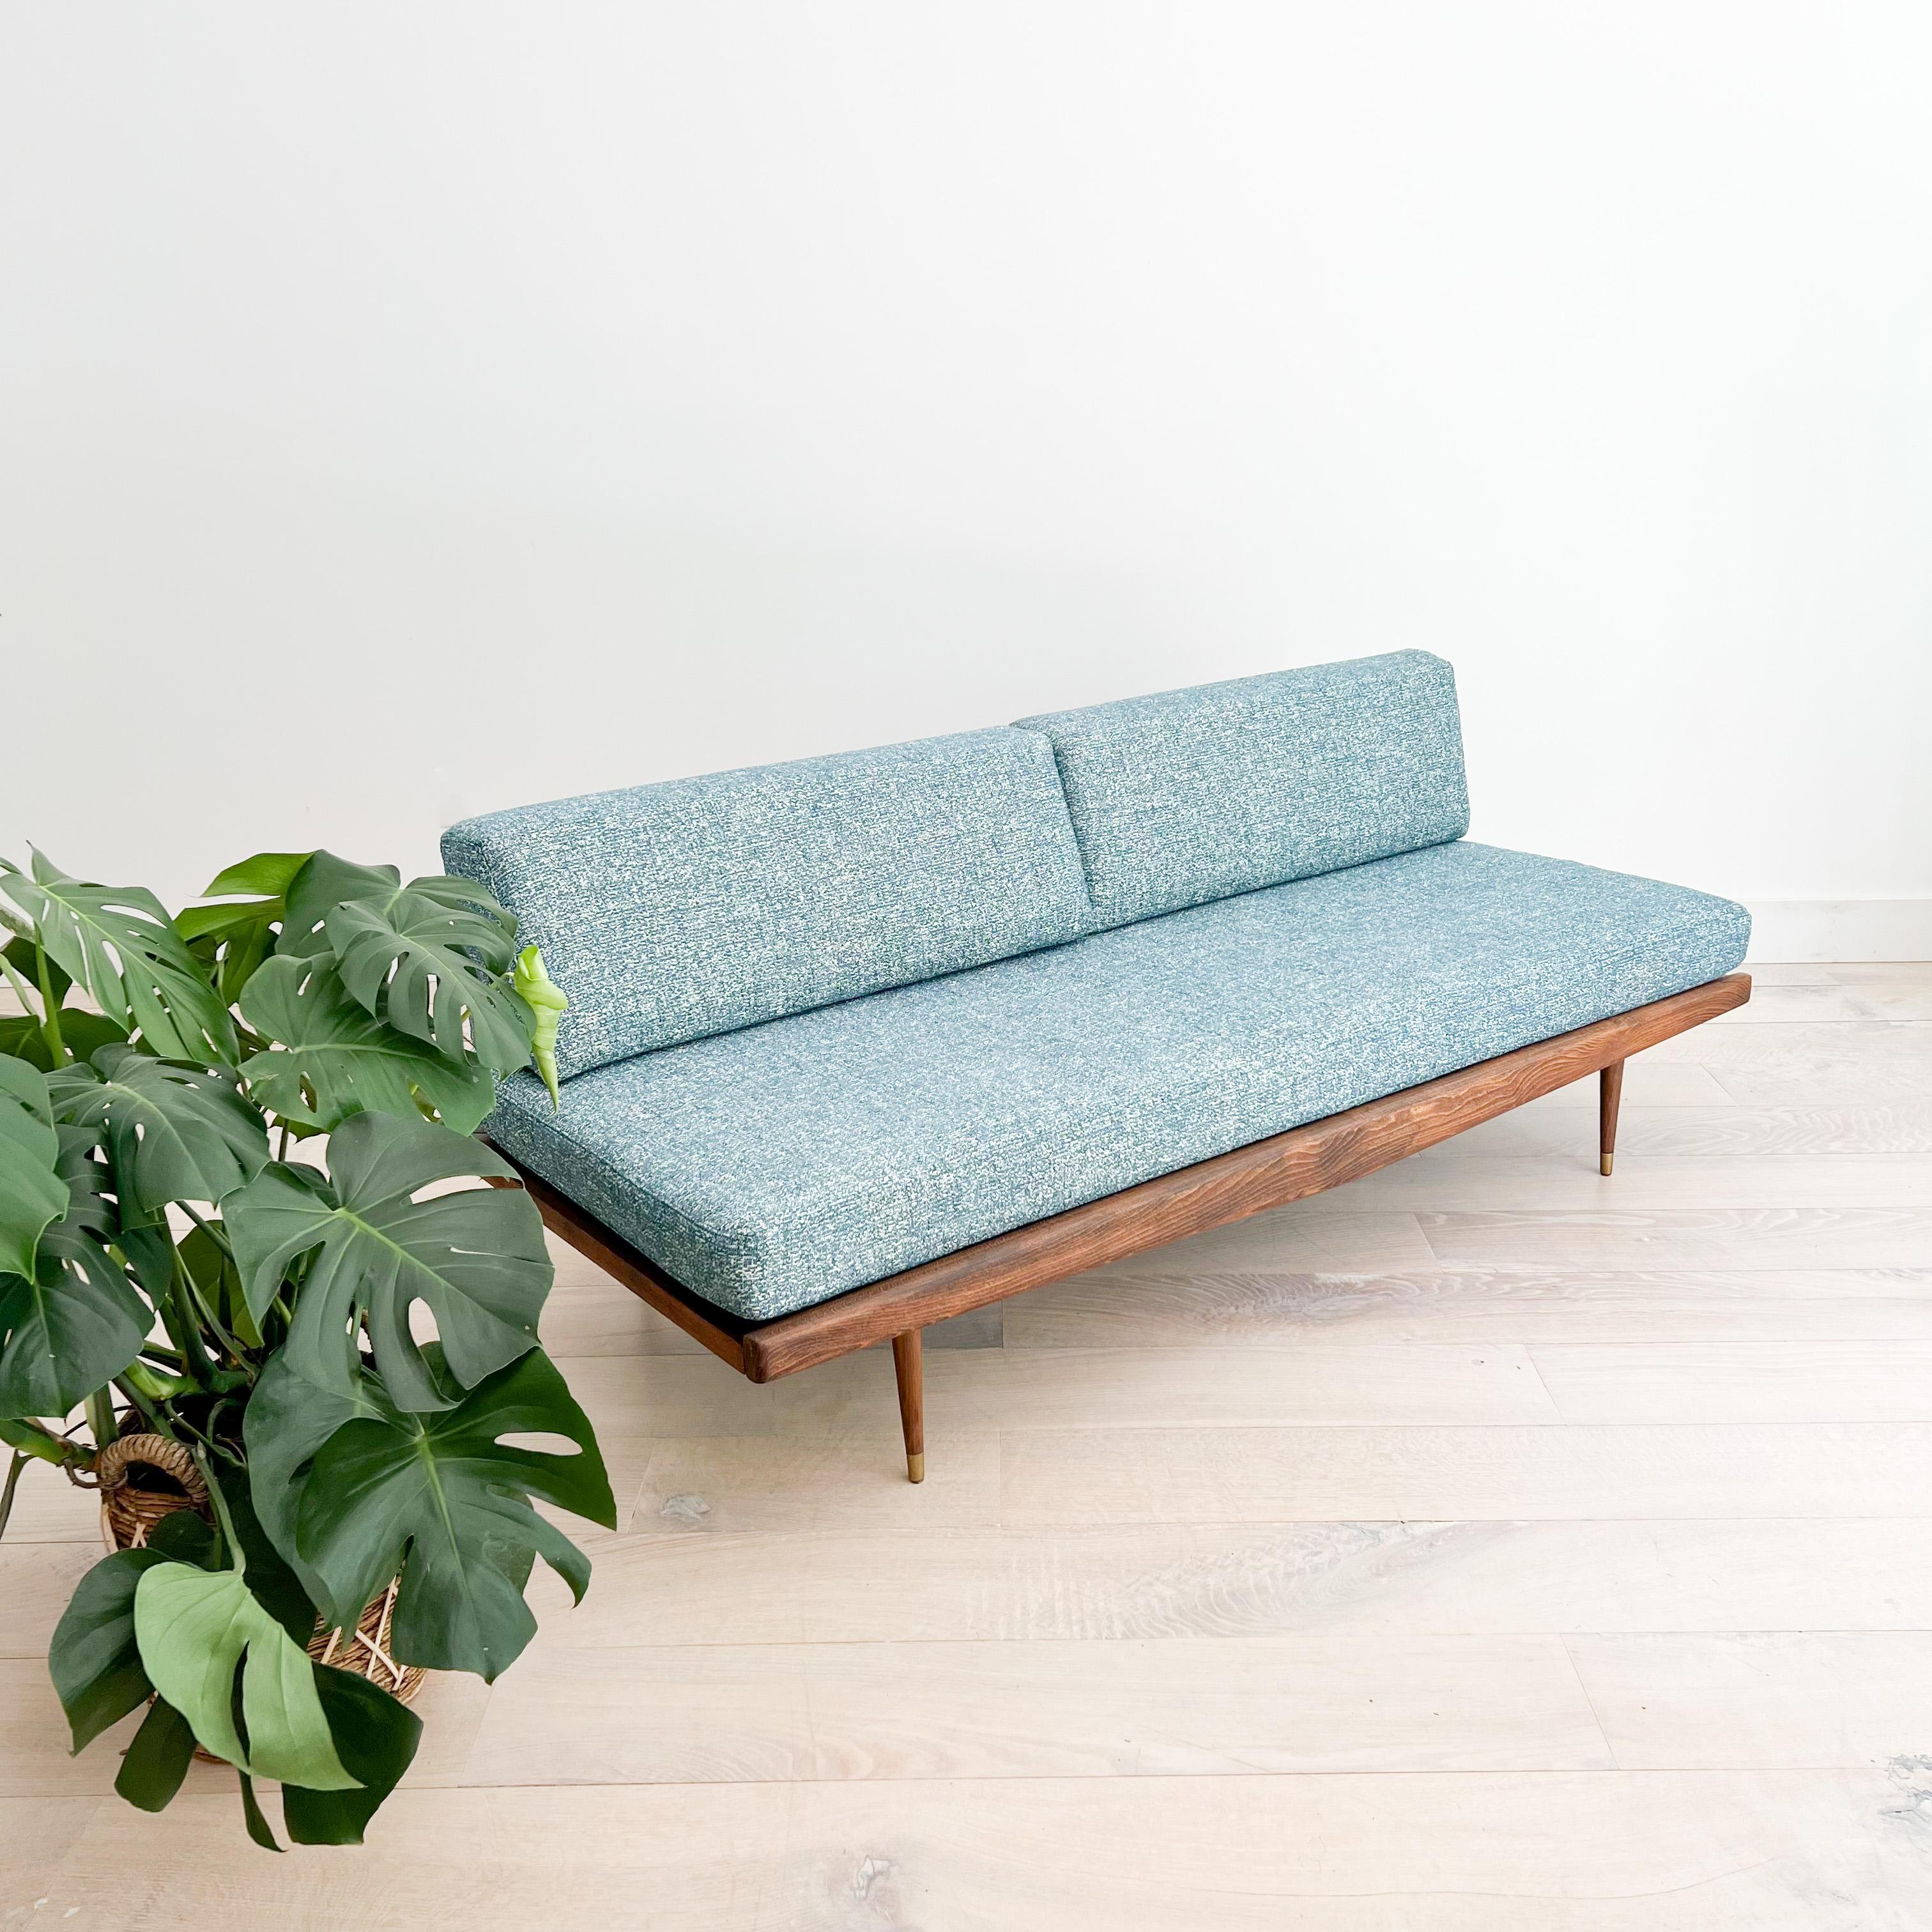 Midcentury Yugoslavian Sofa/Daybed, New Blue Upholstery 2